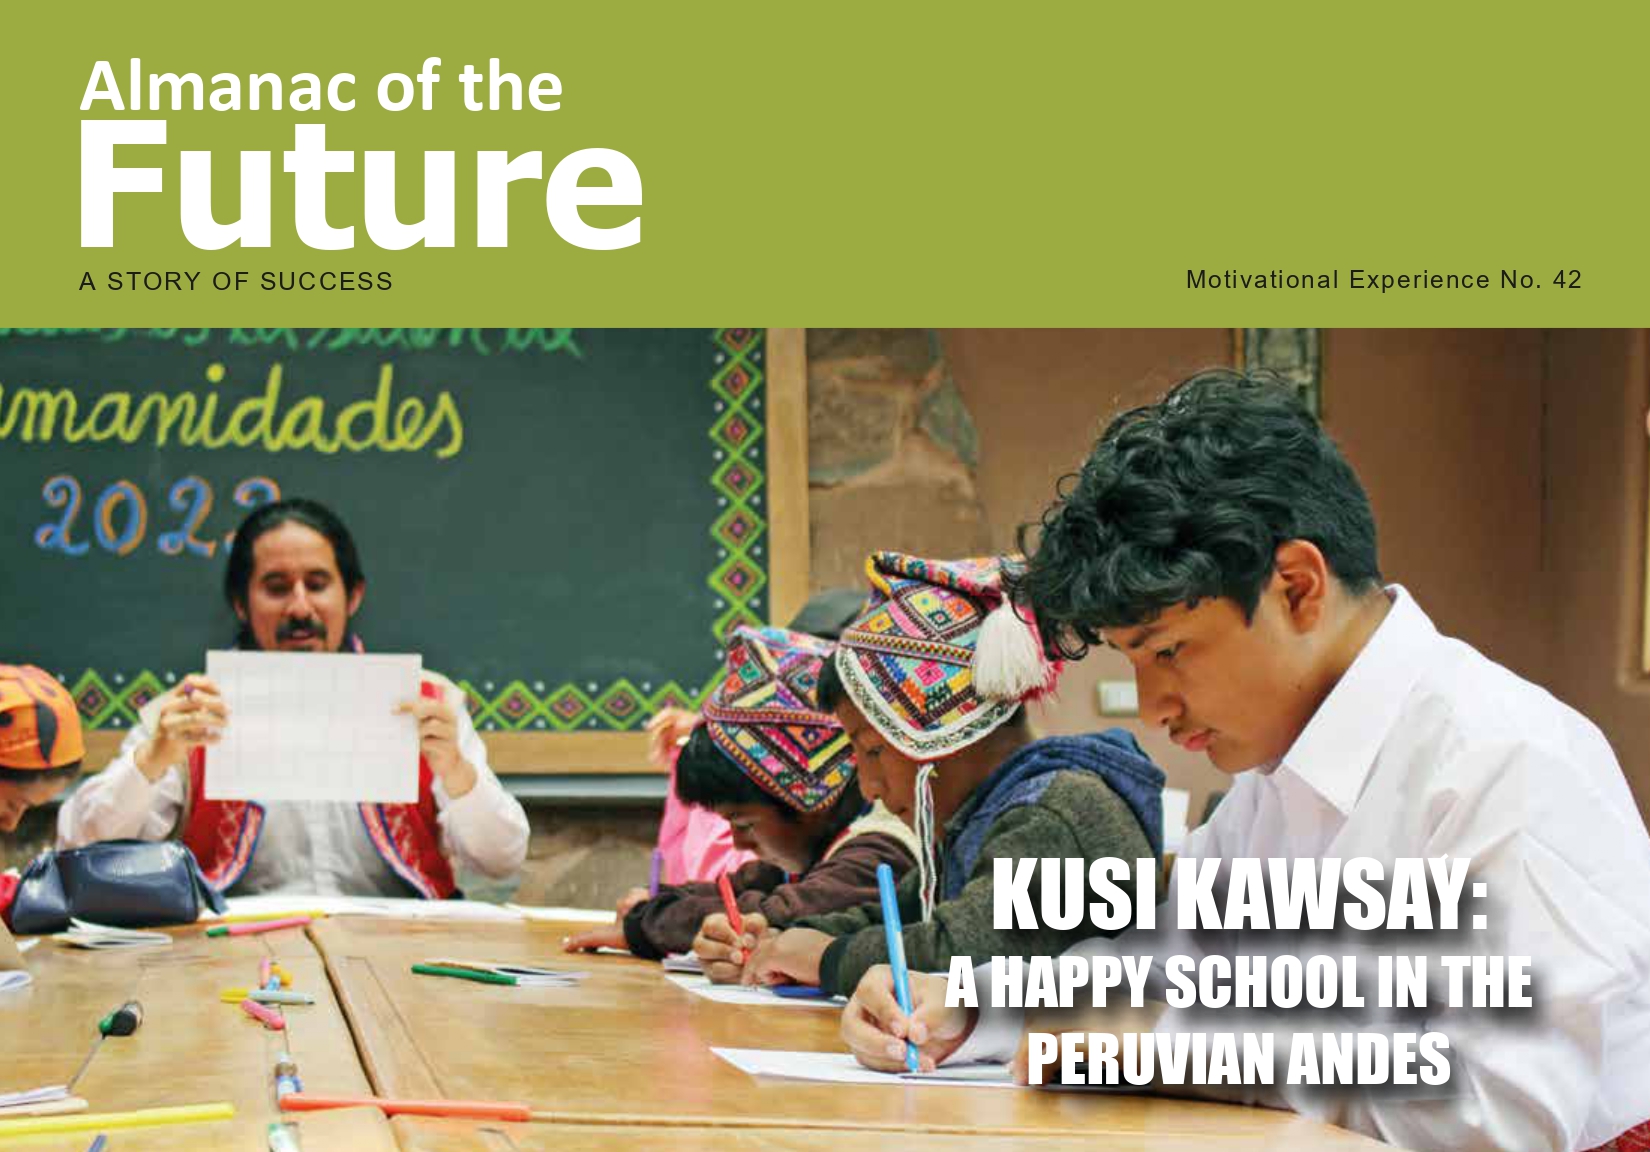 KUSI KAWSAY: A HAPPY SCHOOL IN THE PERUVIAN ANDES